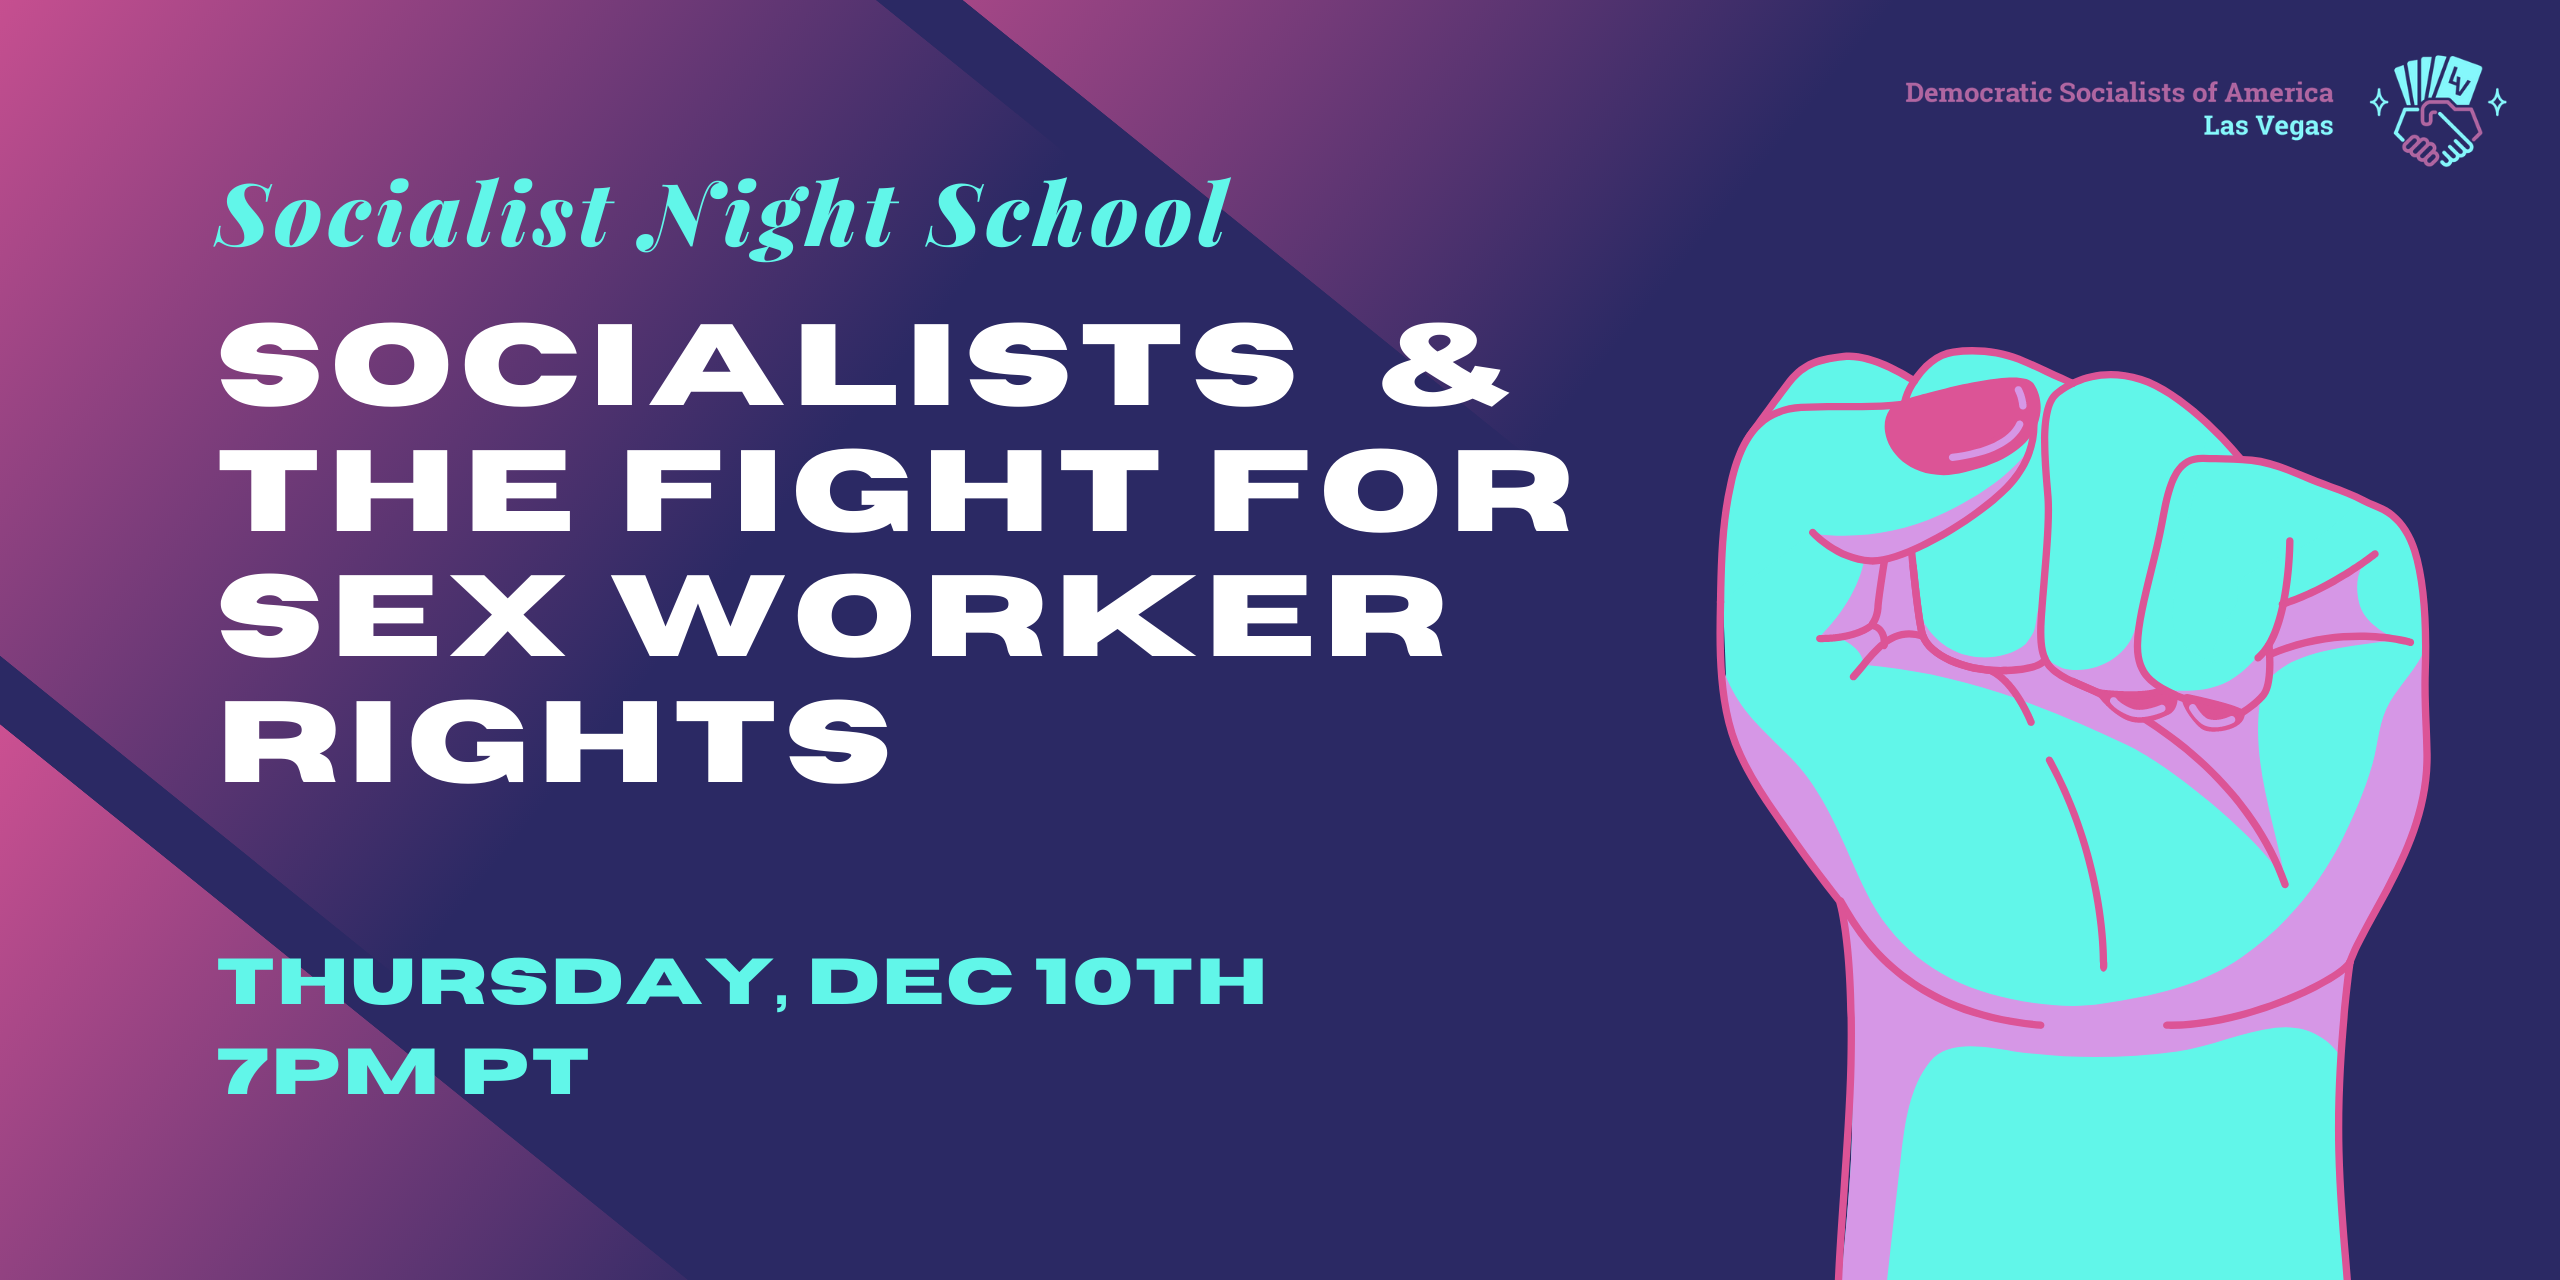 Socialist Night School Socialists And The Fight For Sex Worker Rights